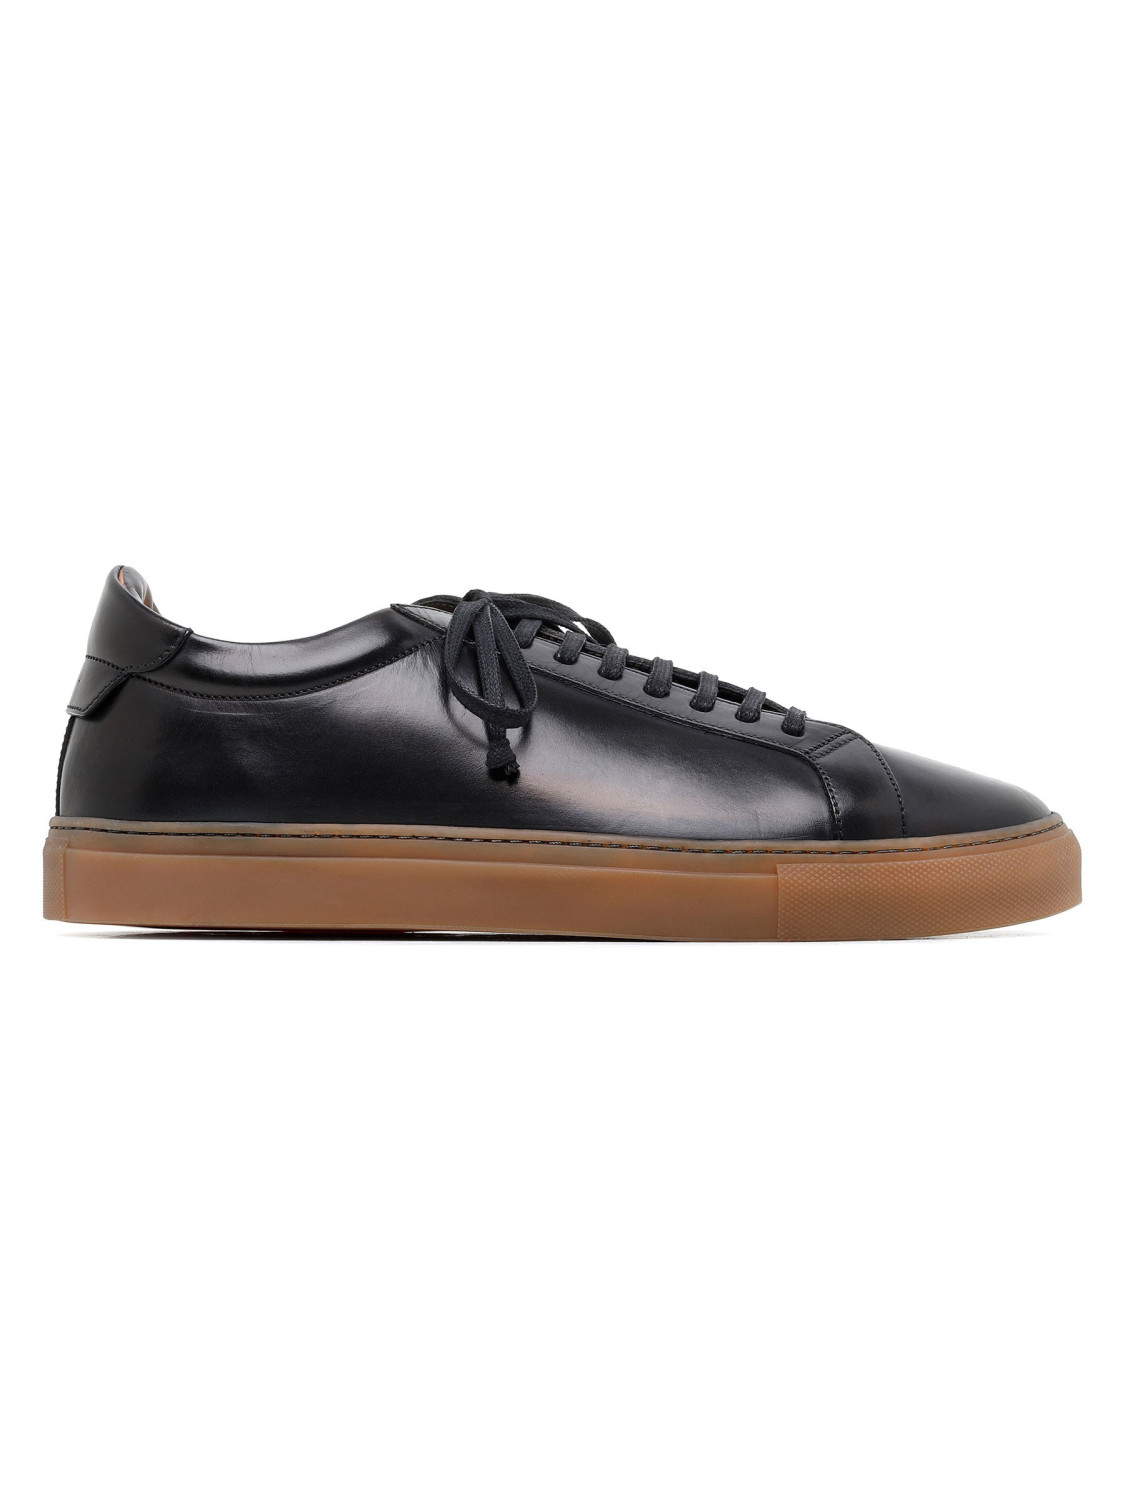 Romilly black leather sneakers